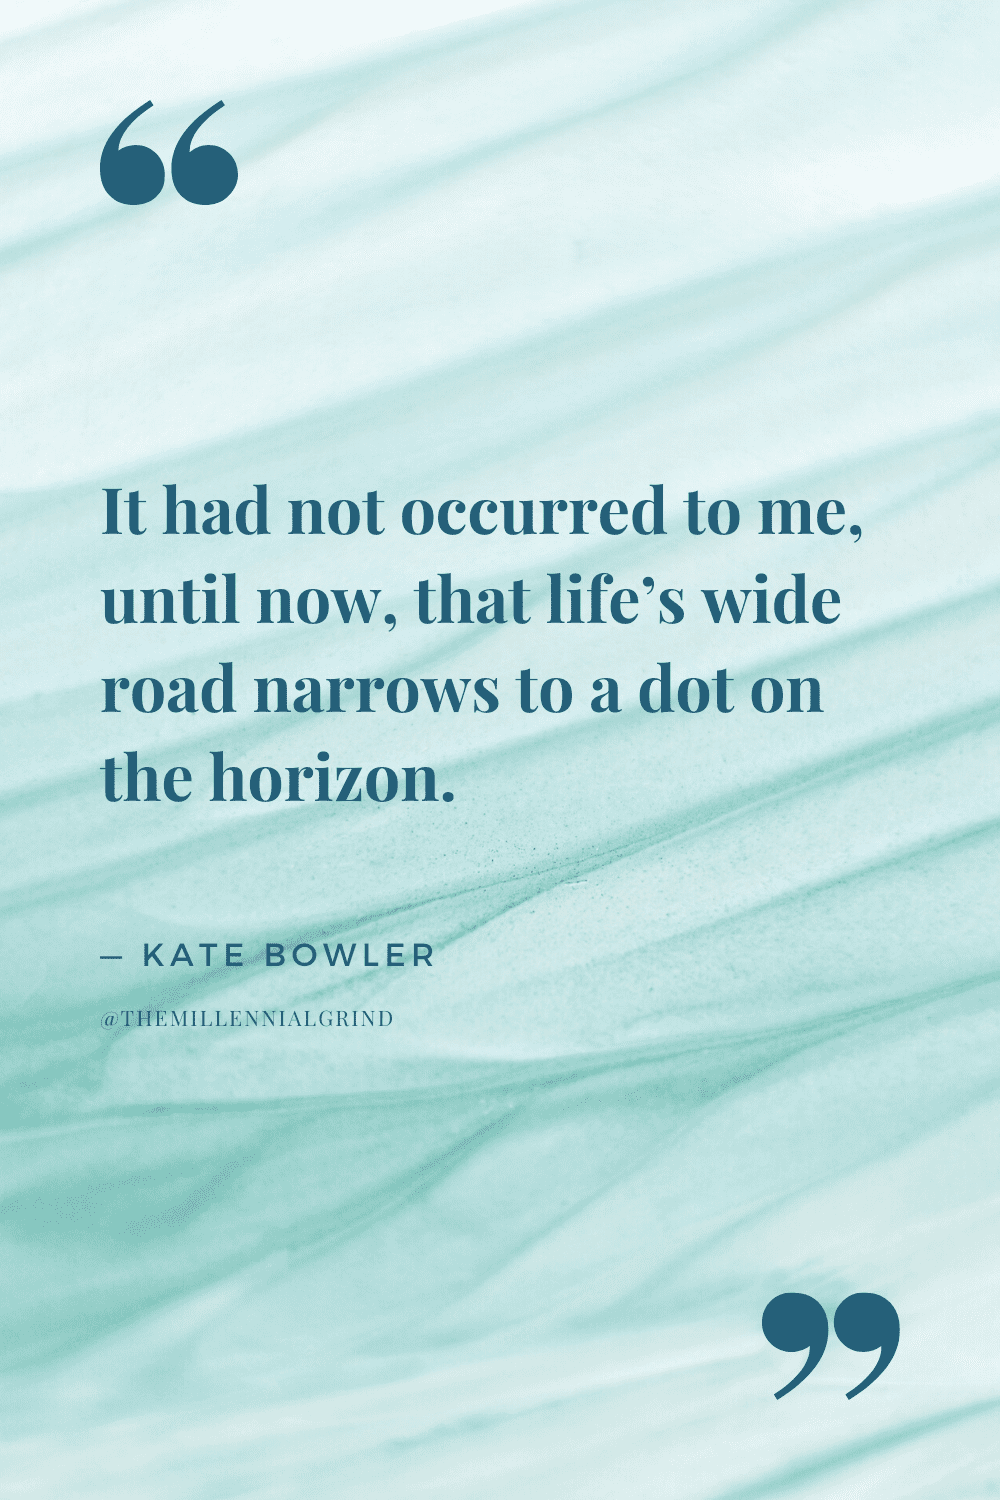 30 Quotes from No Cure for Being Human by Kate Bowler